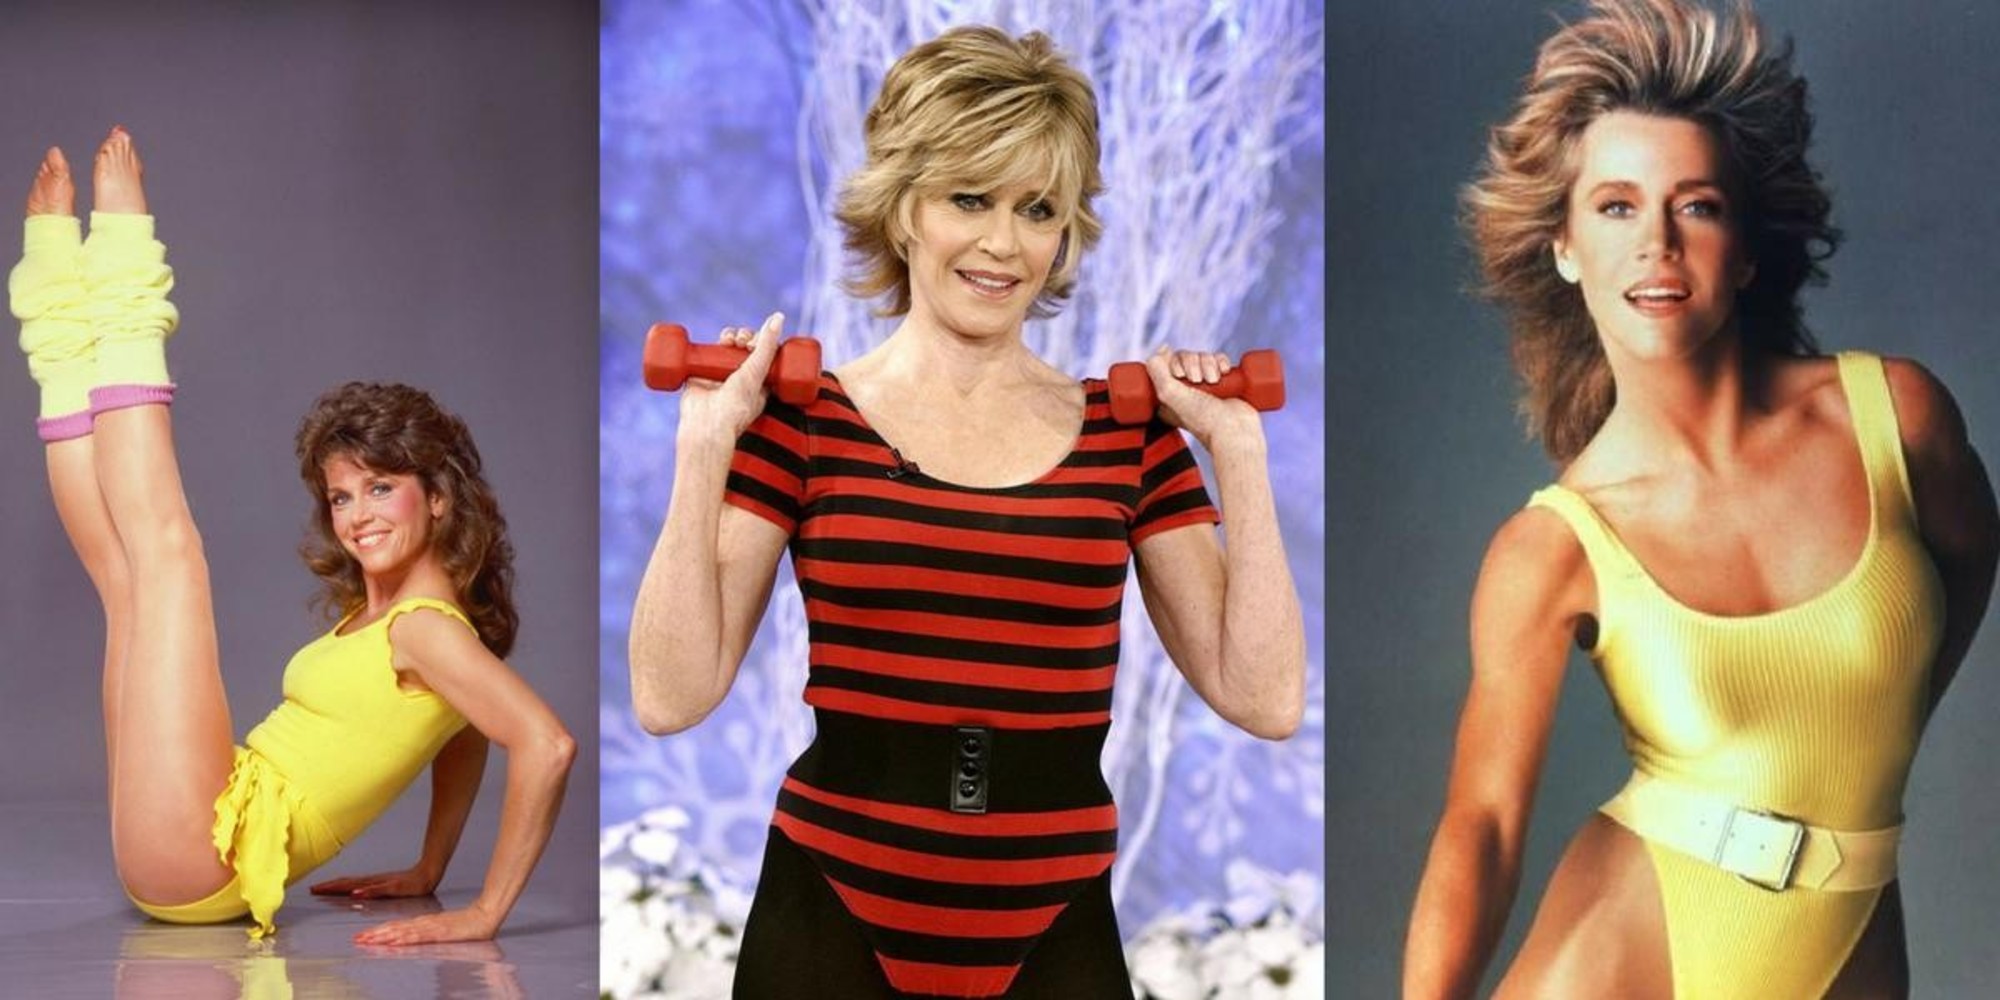 Revisit The 80s With Jane Fonda's Iconic 80s Workout Video.